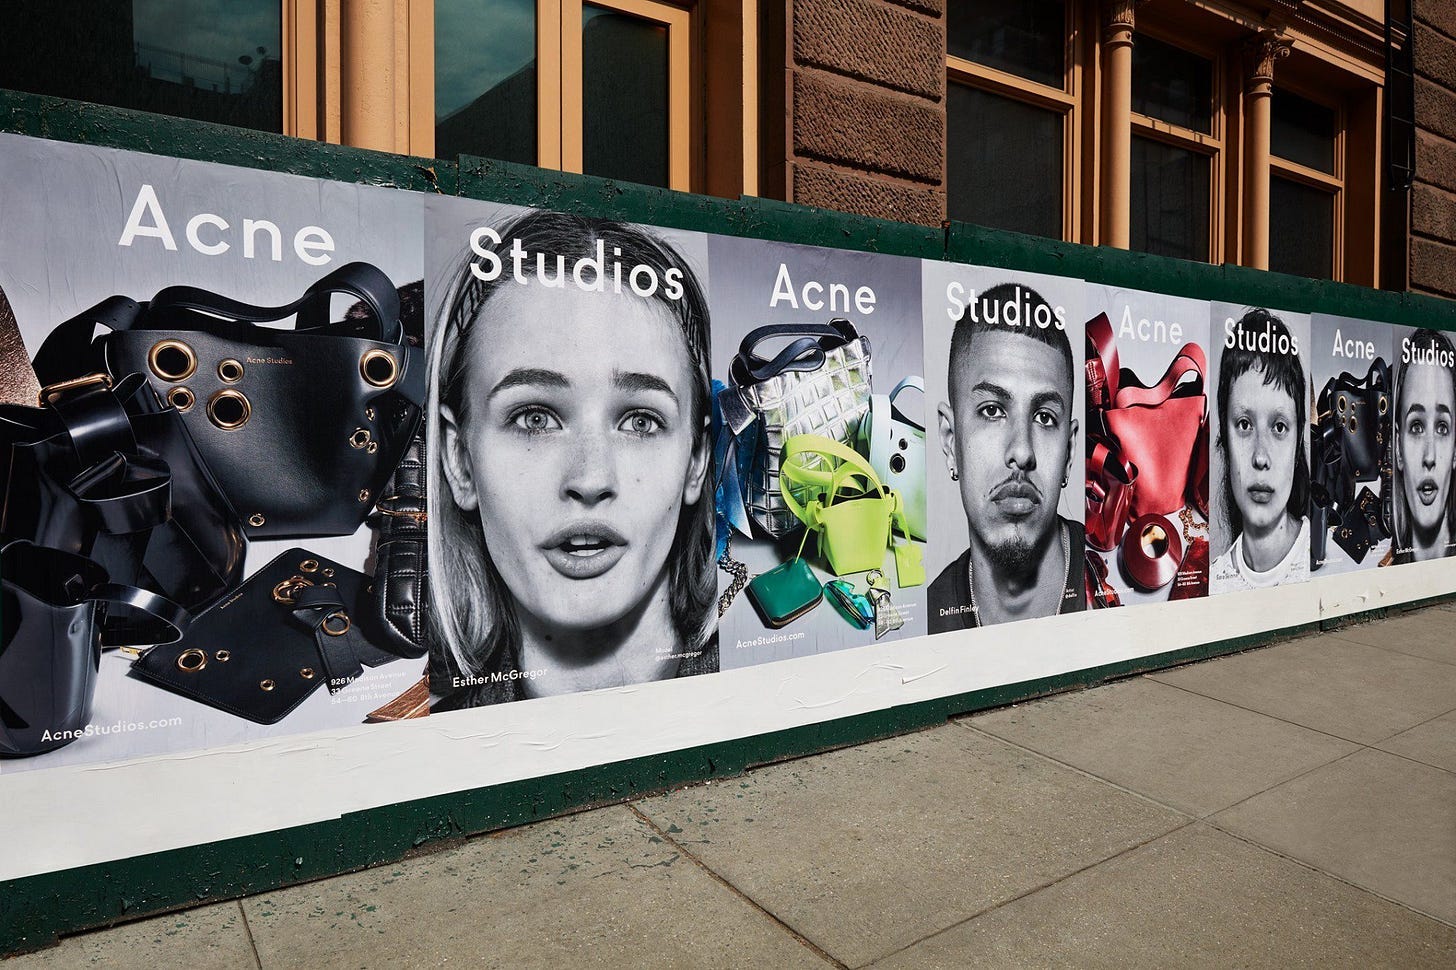 Acne Studios on Twitter: "The #AcneStudios Fall/Winter 2019 campaign  photographed by #RichardBurbridge and featuring #SaraHiromiSkinner,  #DelfinFinley and #EstherMcGregor – as seen in the streets of New York.  https://t.co/Sqq9vTyeYt" / Twitter